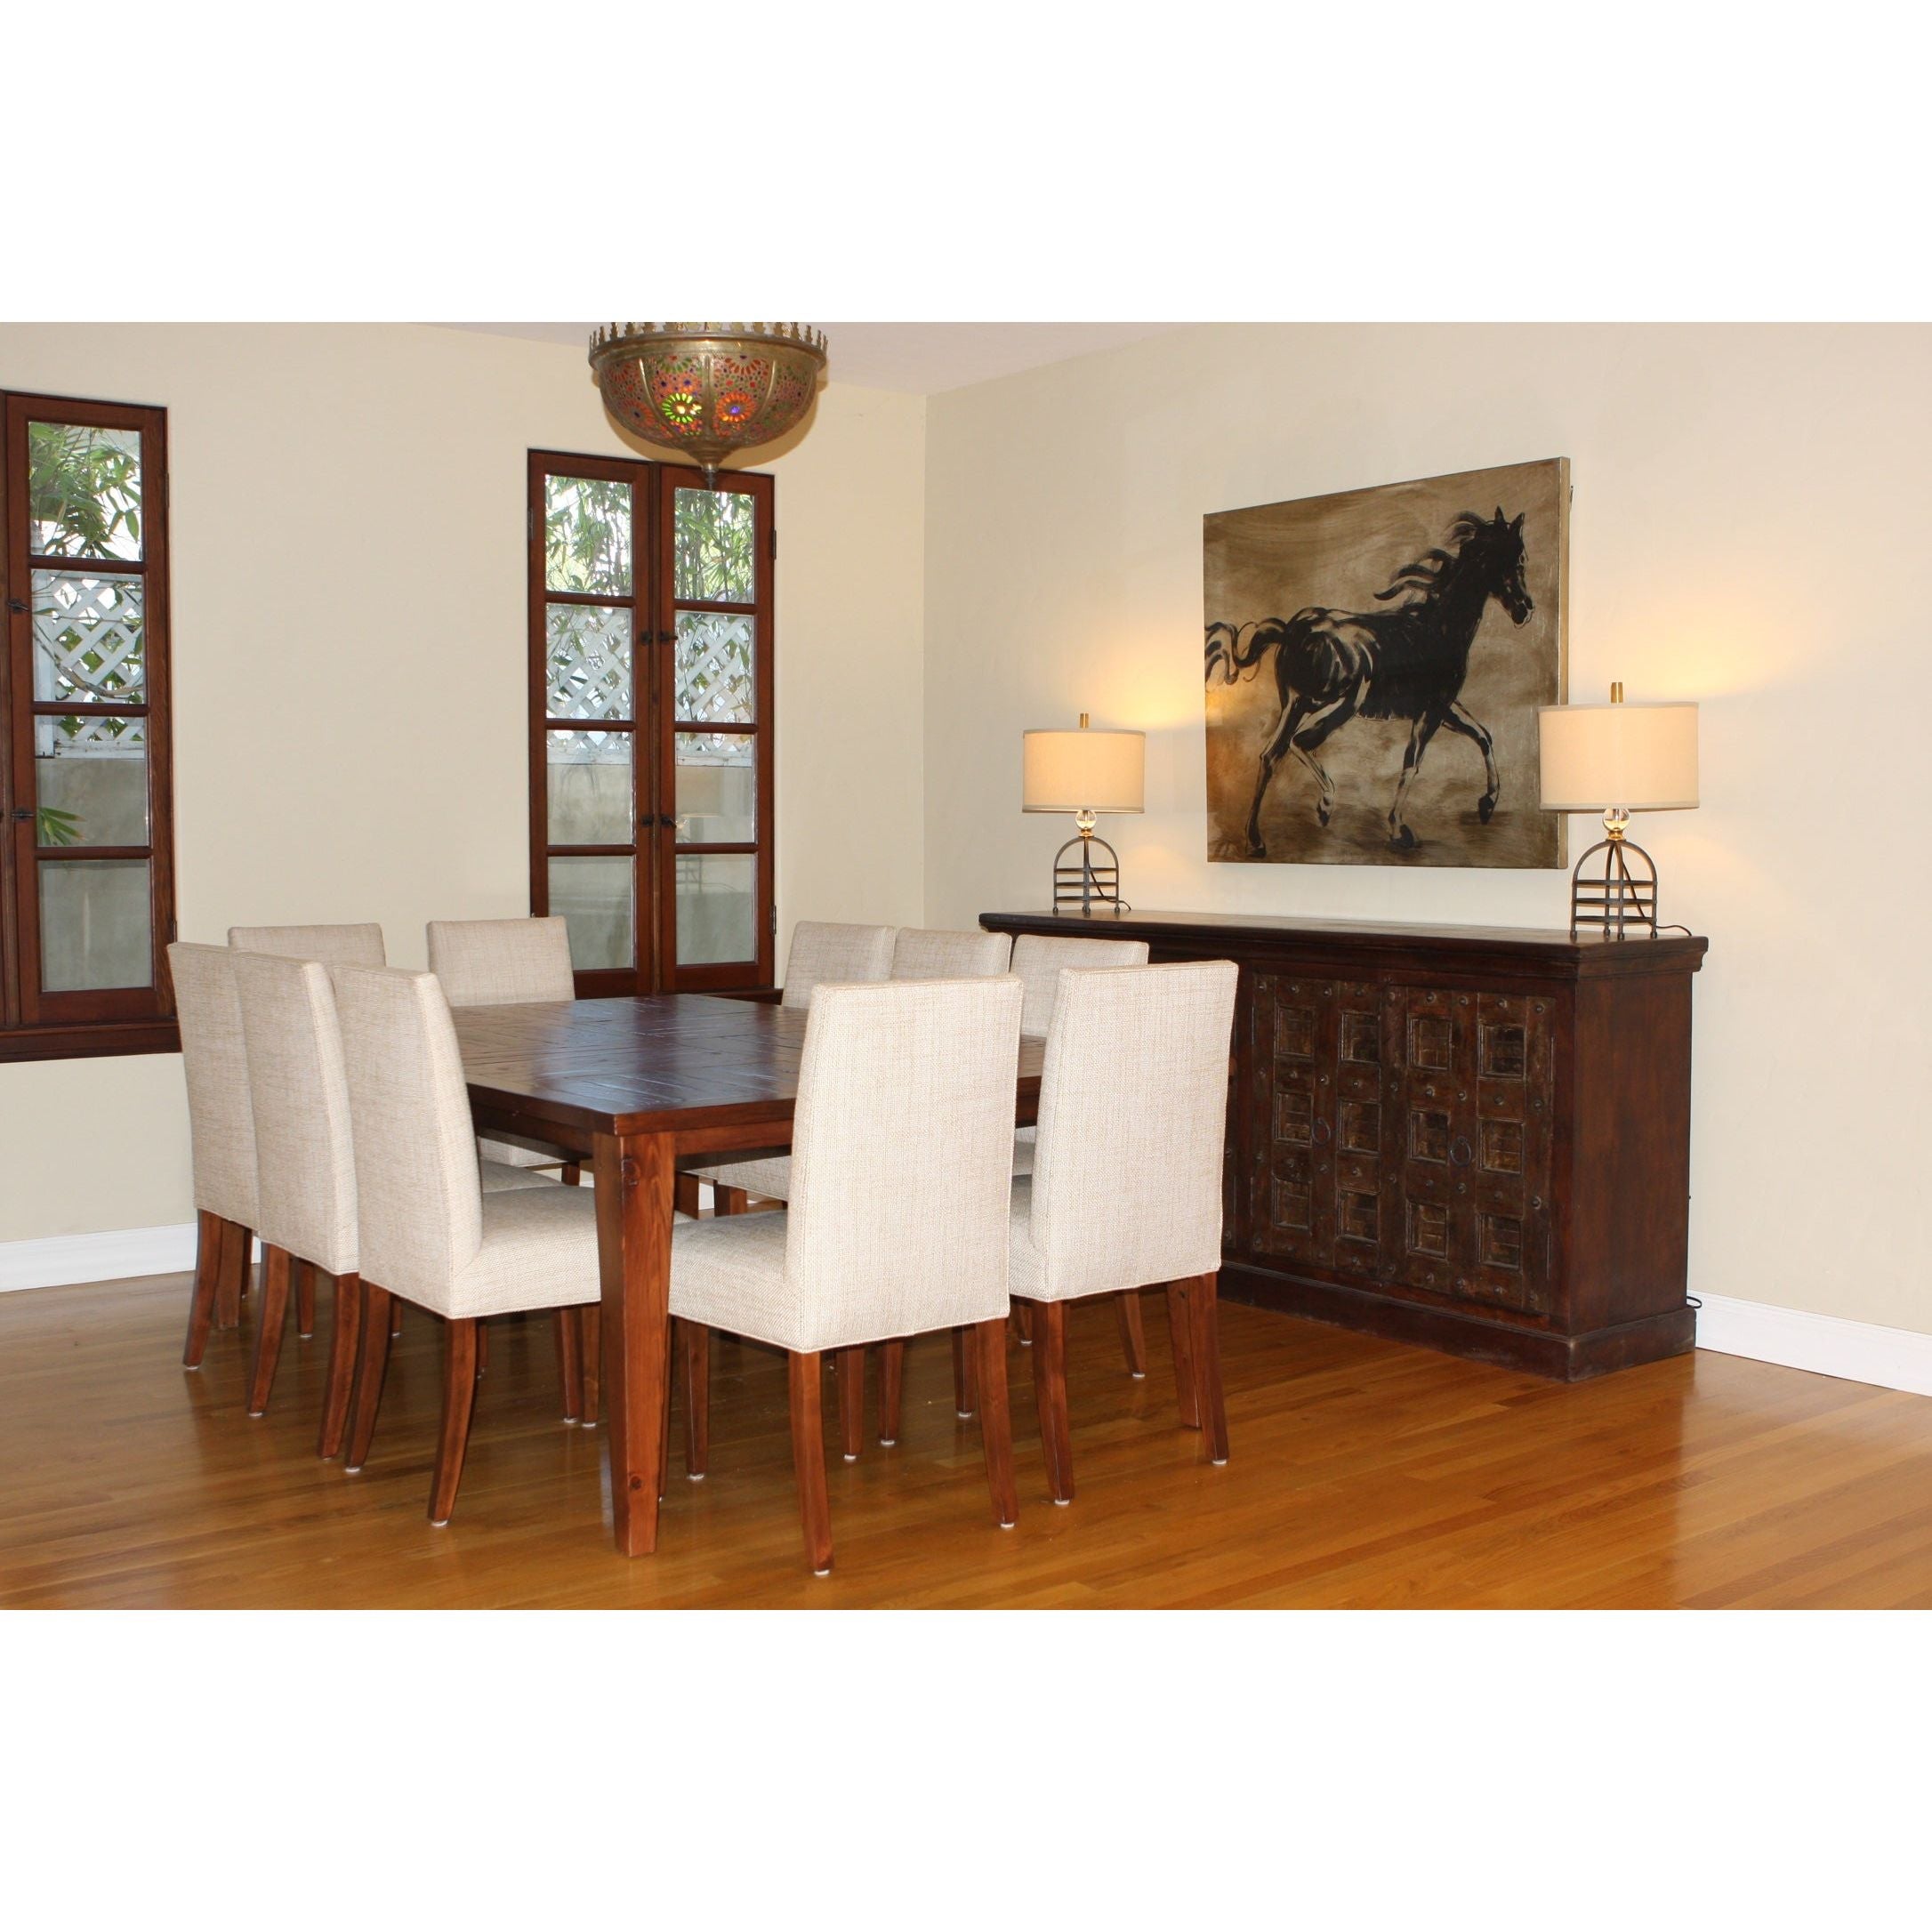 Classic Southern California Spanish Colonial Dining Room And